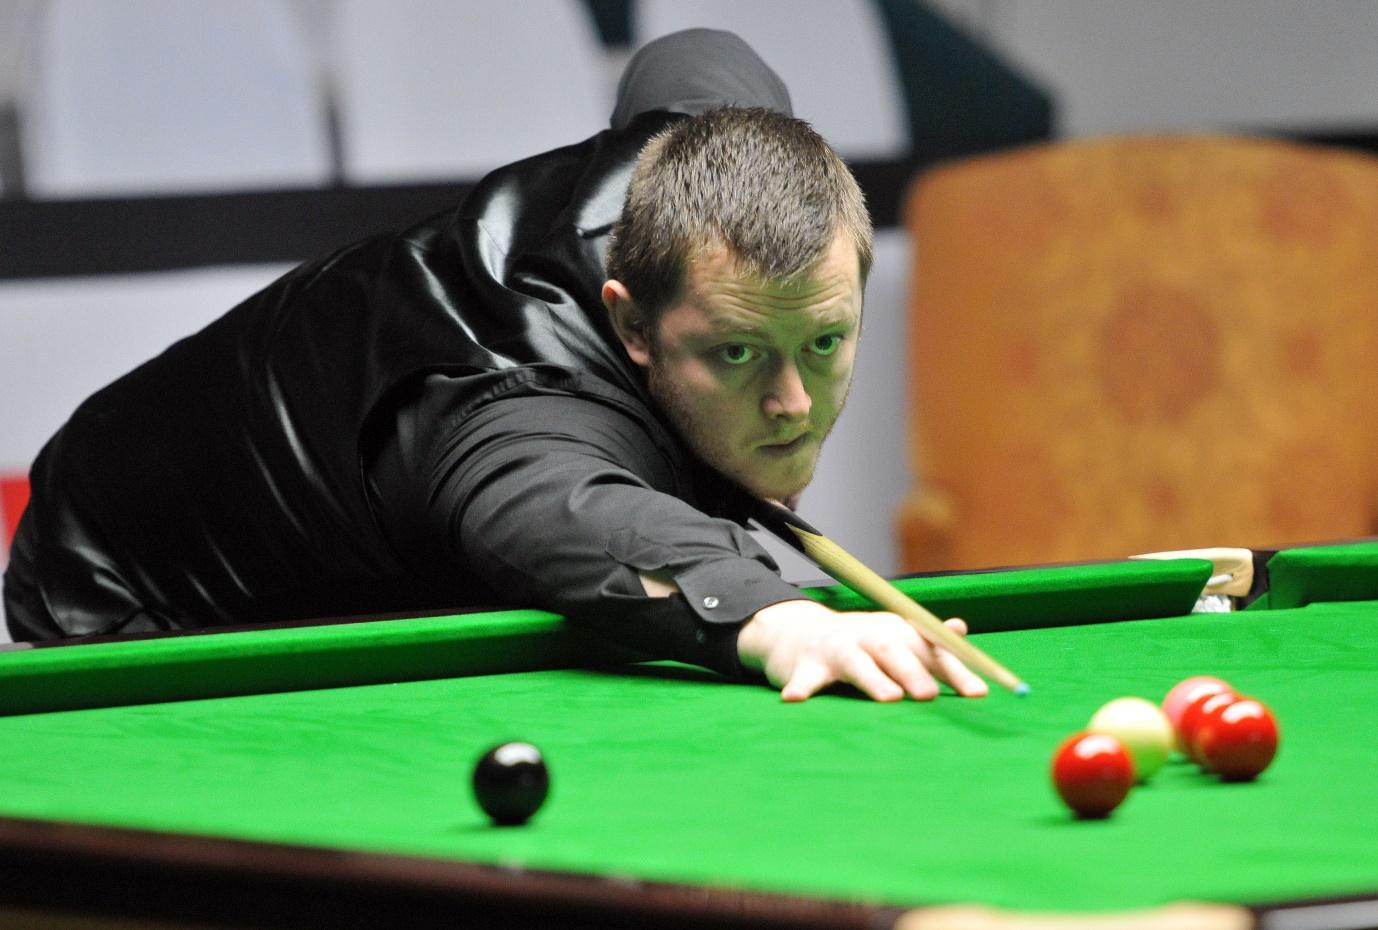 Mark Allens sensational season will be defined by his display at the World Snooker Championship